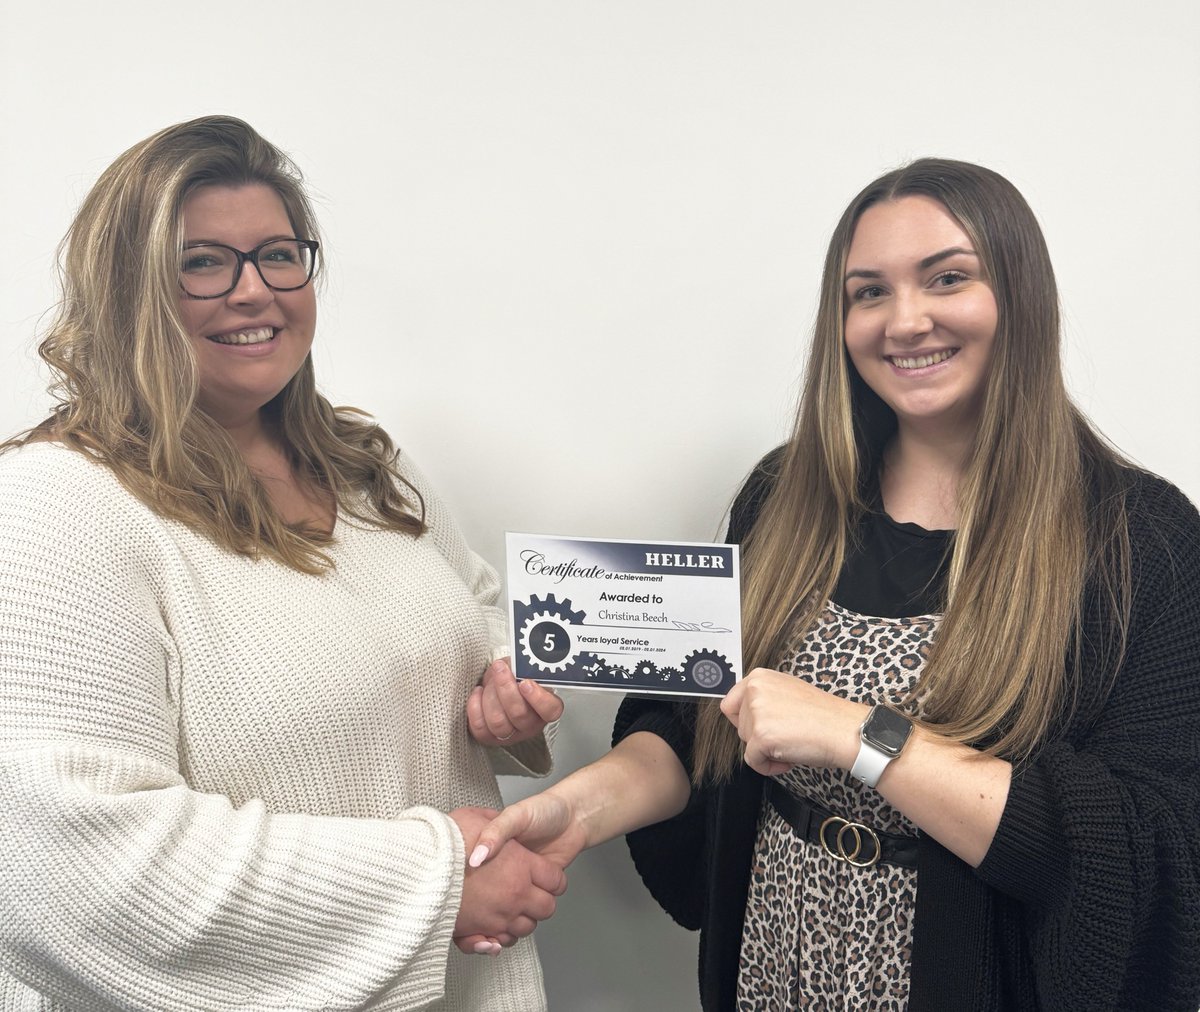 🎉Celebrating 5 Years of Loyal Service: Chrissie Beech at Heller Machine Tools🎉 We express our heartfelt gratitude to Chrissie for her outstanding dedication and commitment over the past five years as an Accounts Clerk #hellermachinetools #team #loyal #service #award